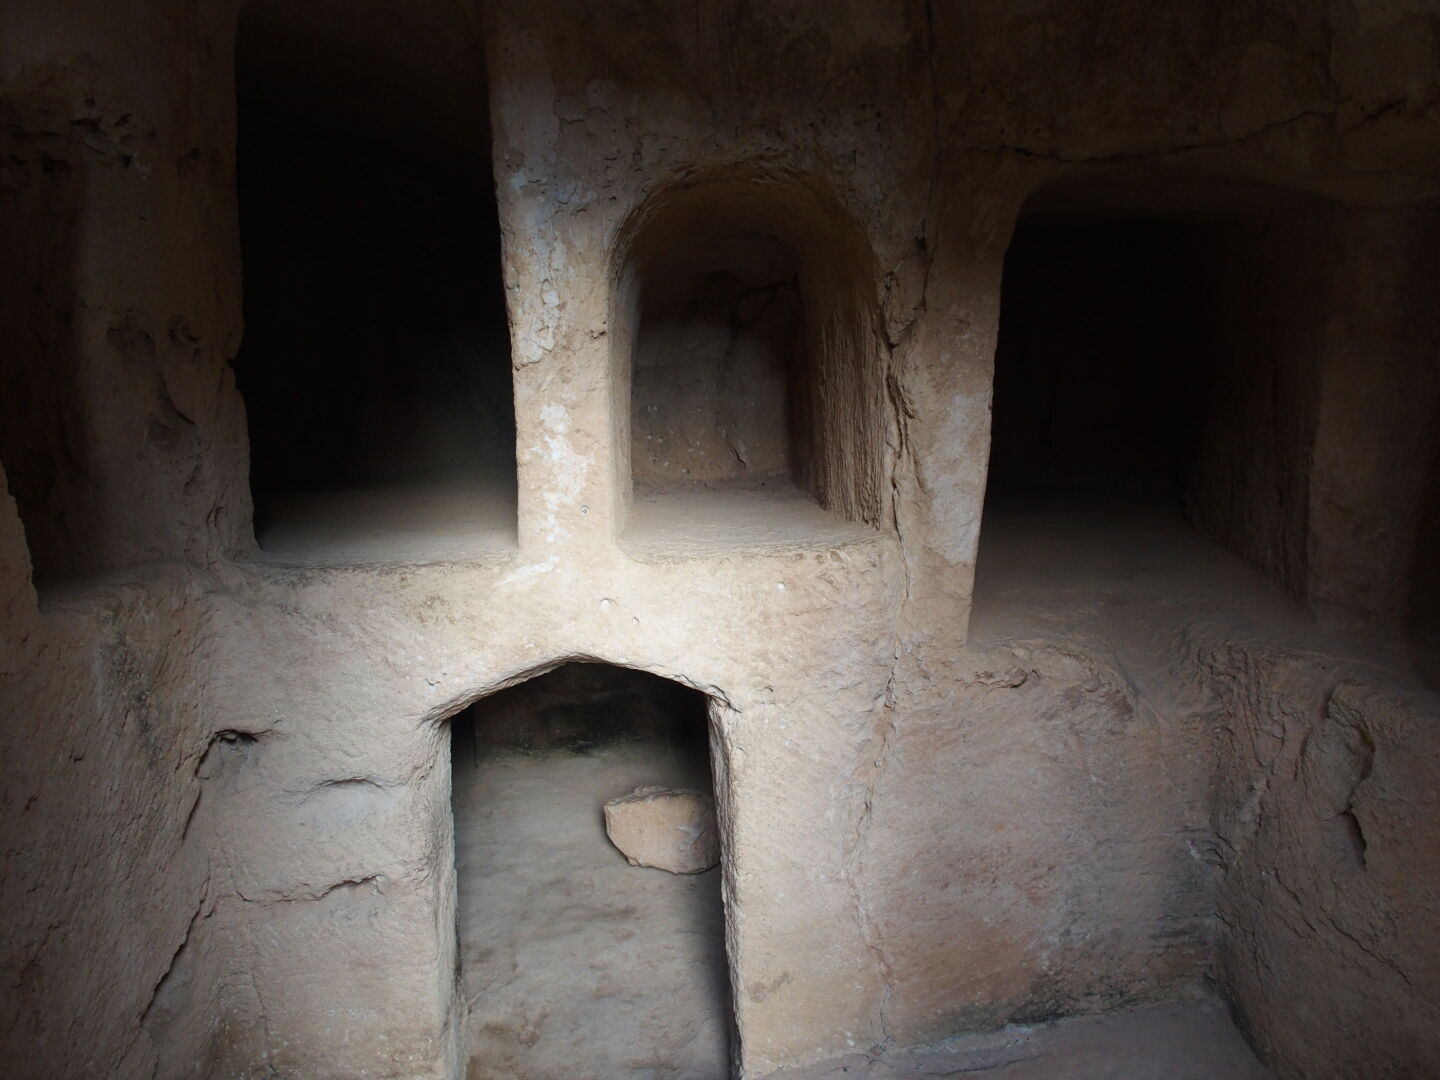 Small chambers on the sides contained cavities where the dead were laid to rest.